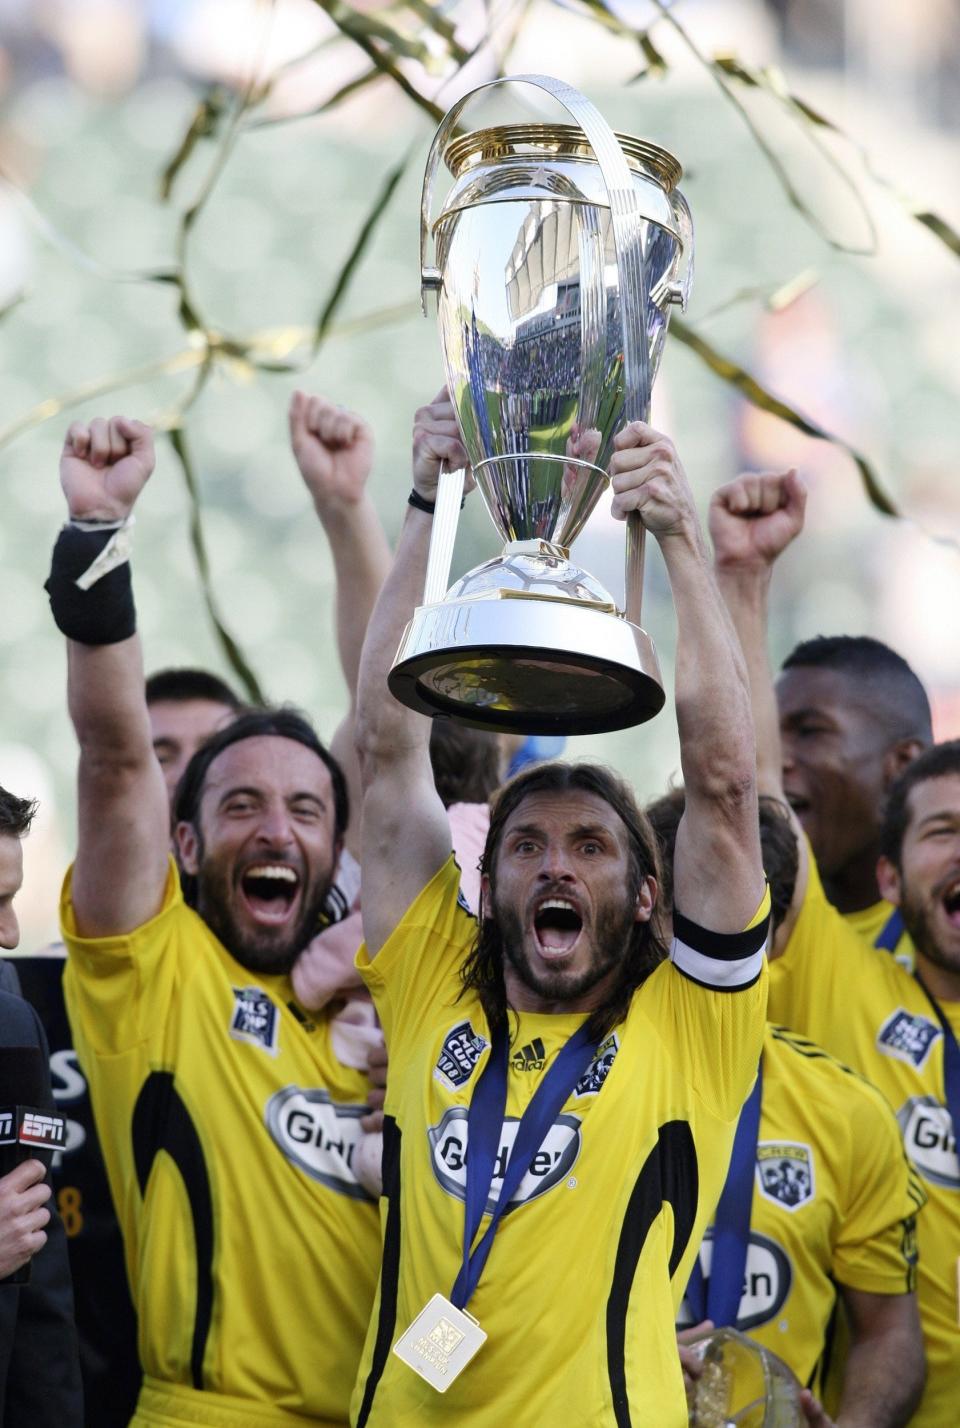 The Crew's Frankie Hejduk holds up the MLS Cup trophy after their 3-1 win over the New York Red Bulls in 2008.